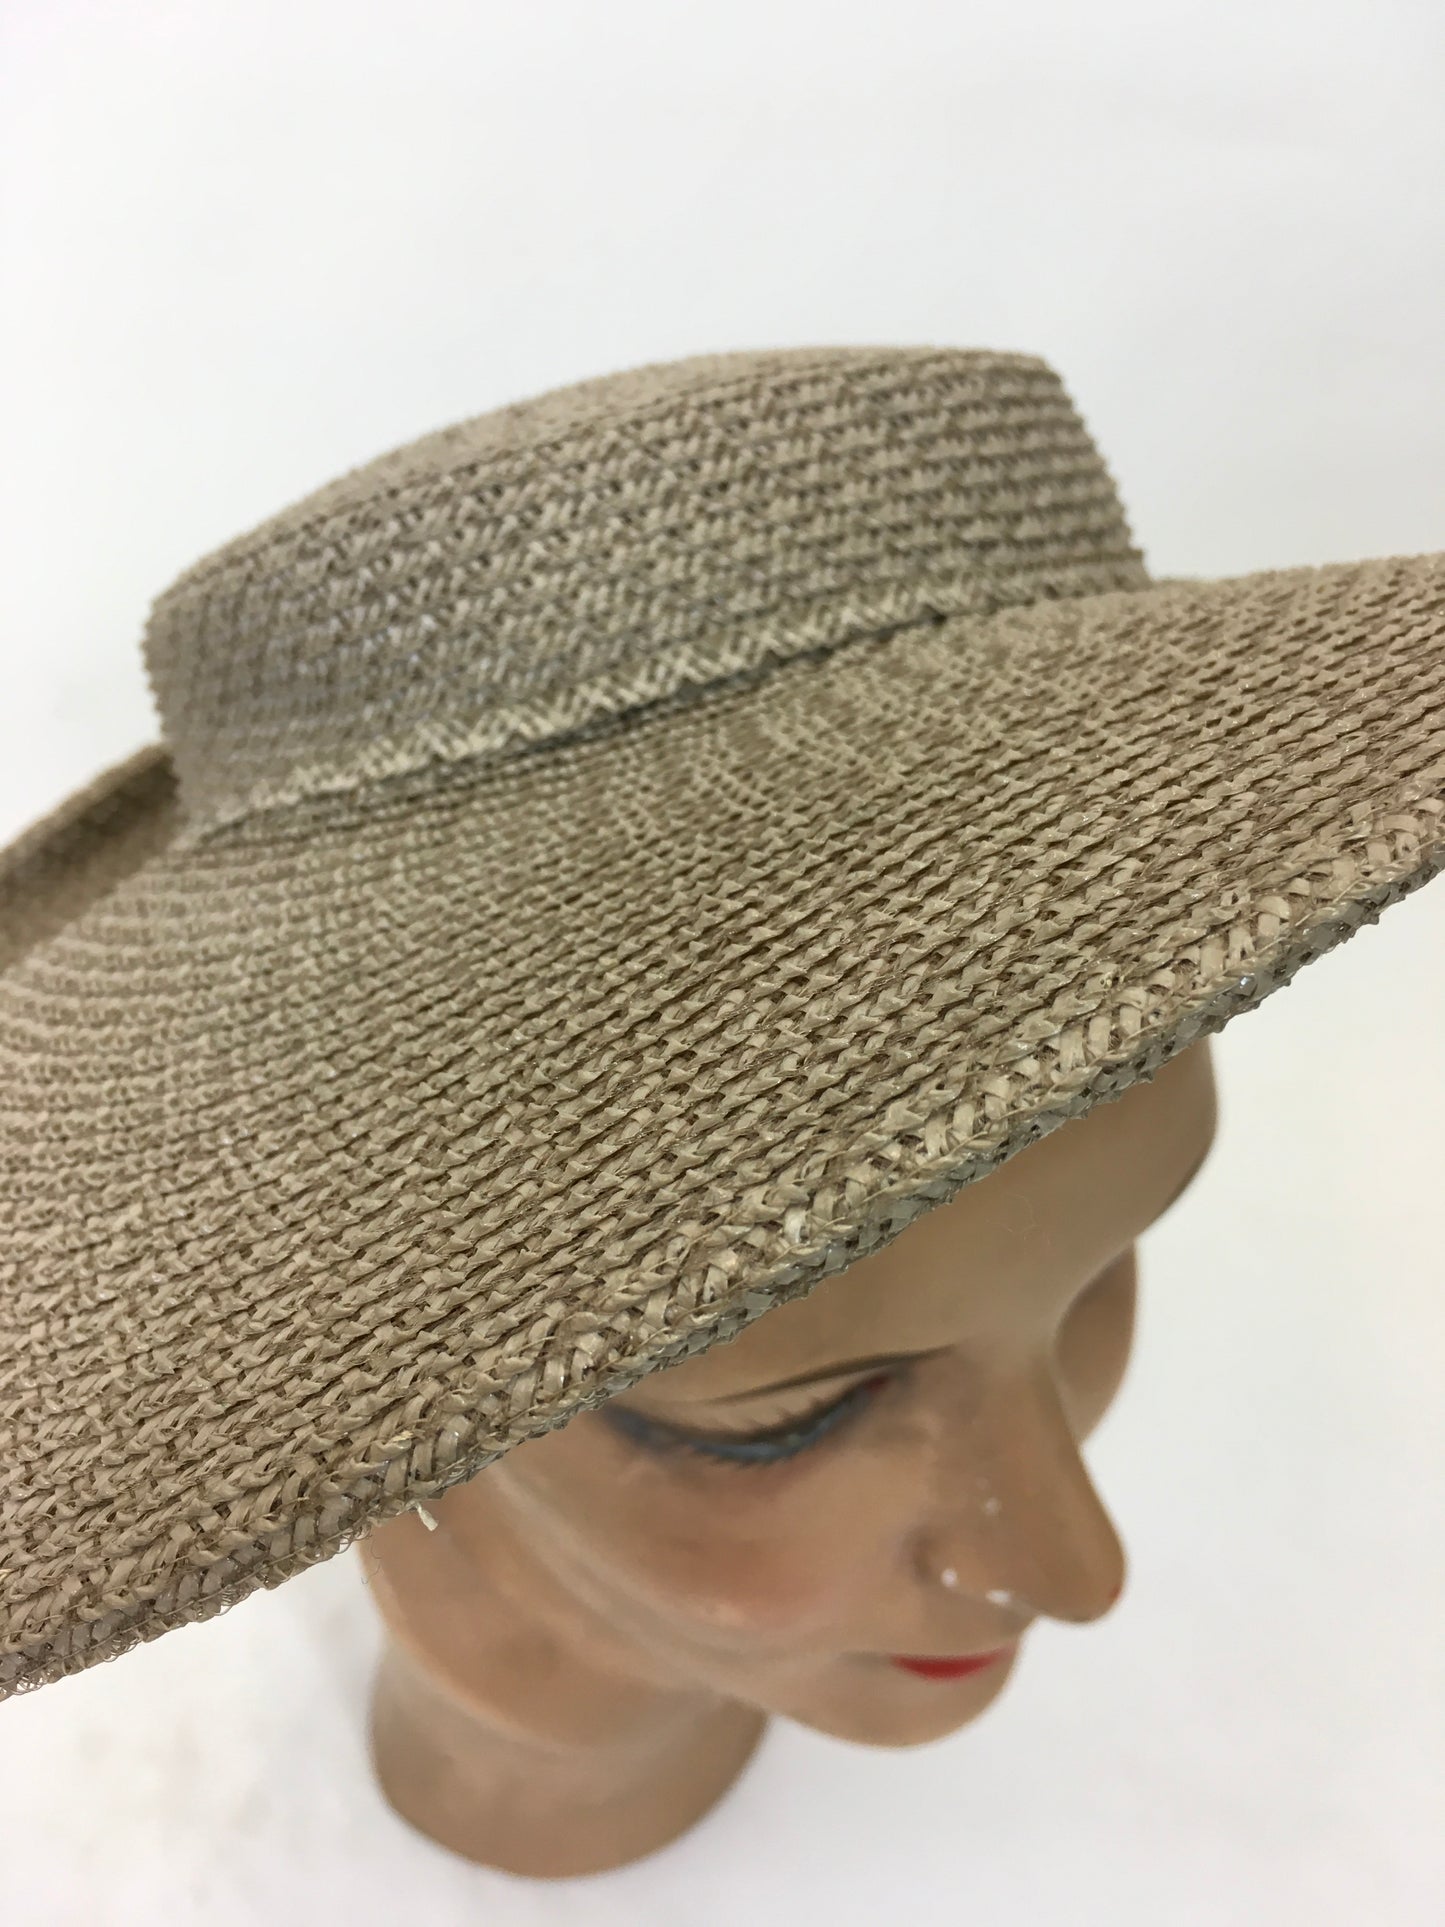 Original 1940's Fabulous Woven Raffia Hat - In A Soft Mushroom With Back Bow Detailing